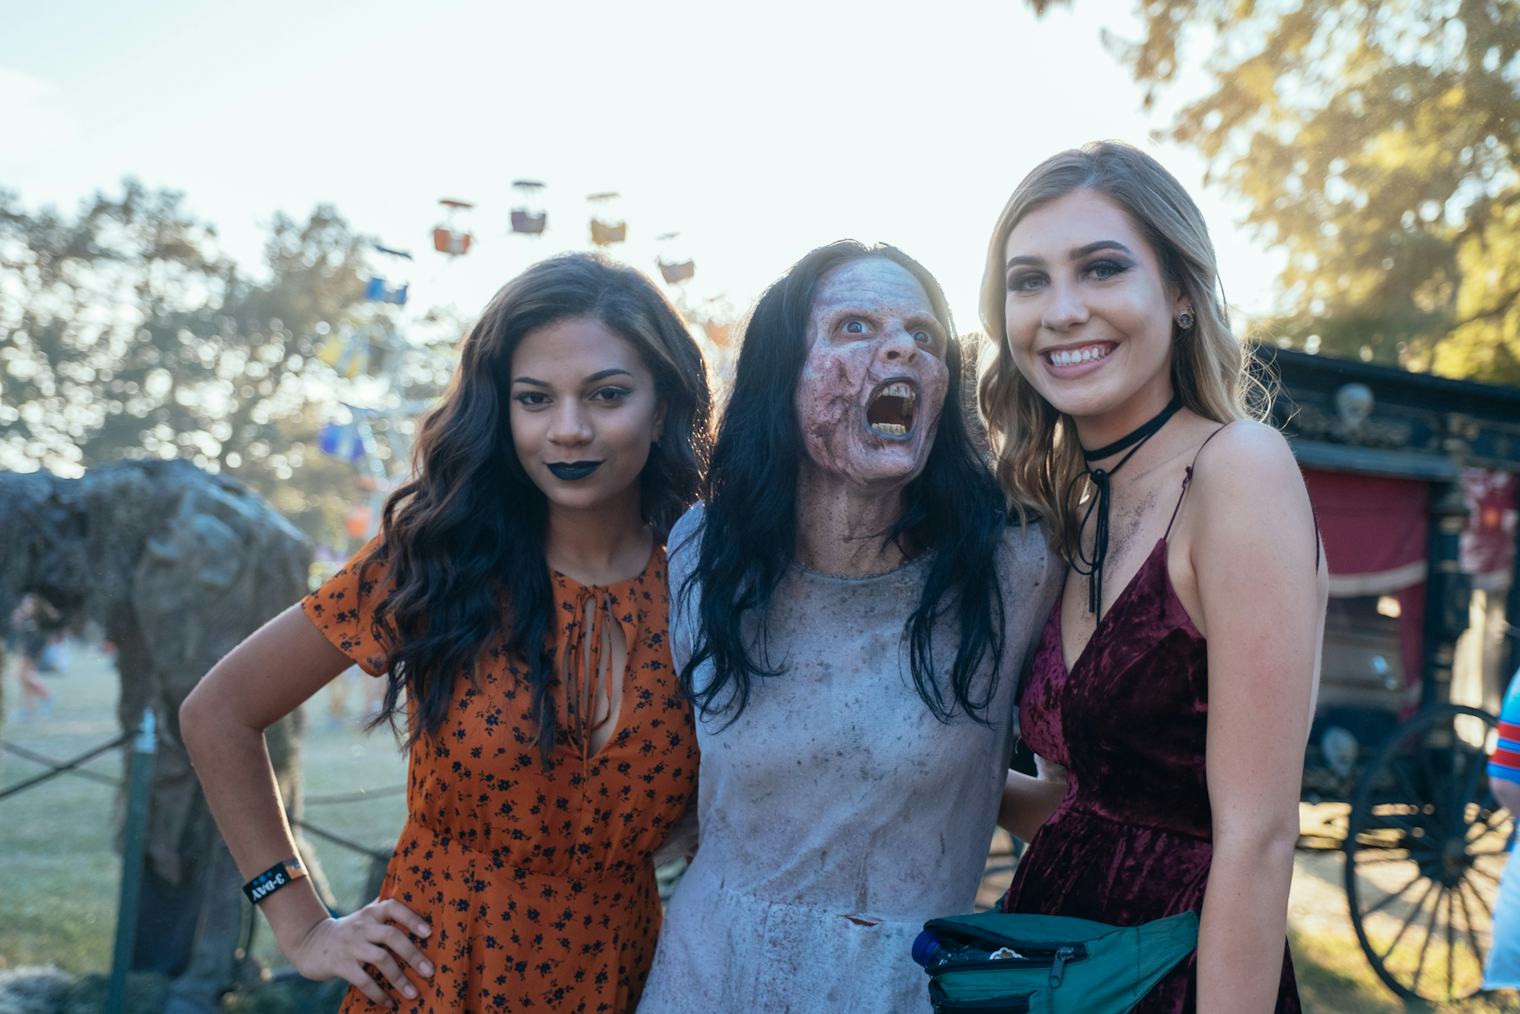 The Best Costumes We Saw At Voodoo Fest 2016